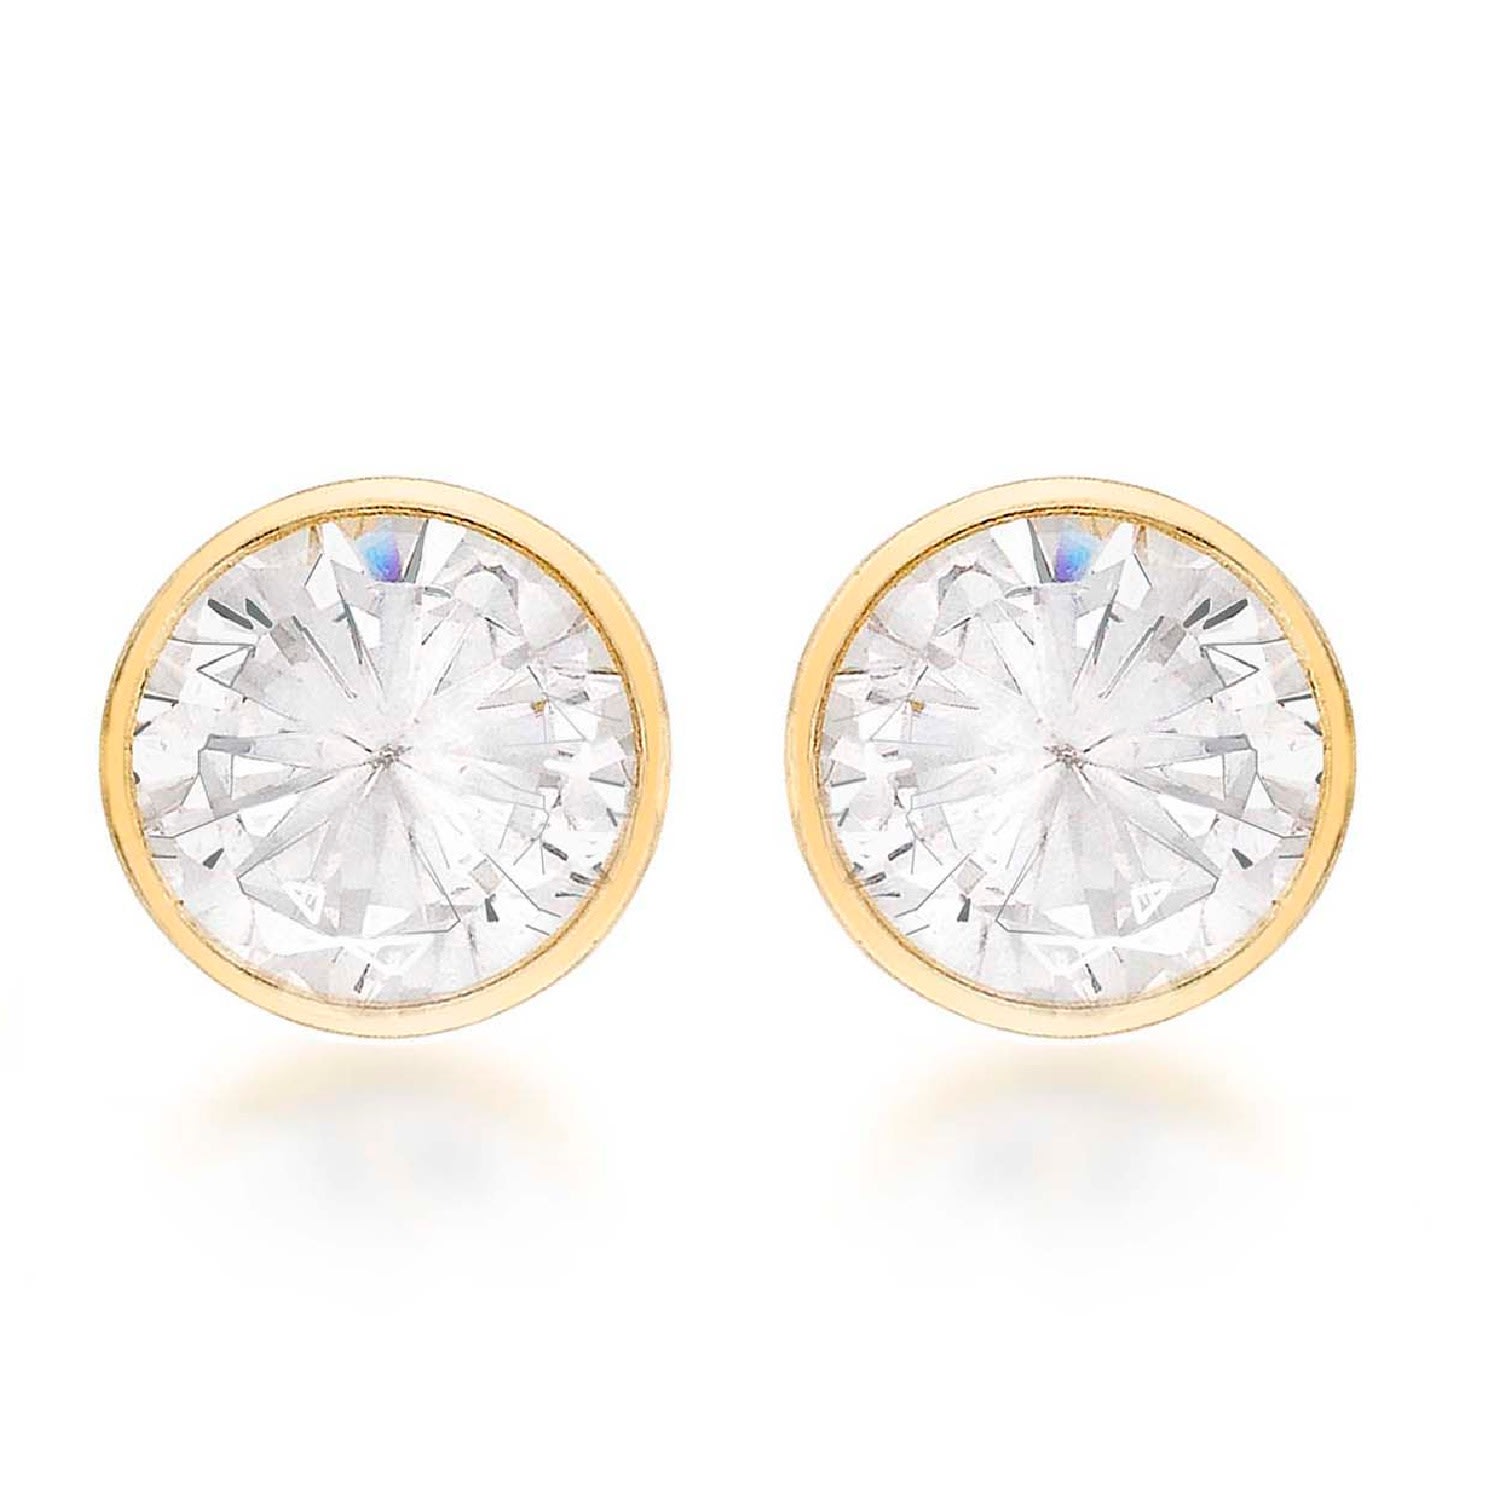 Women’s Round Gold Stud Earrings With Cubic Zirconia Posh Totty Designs